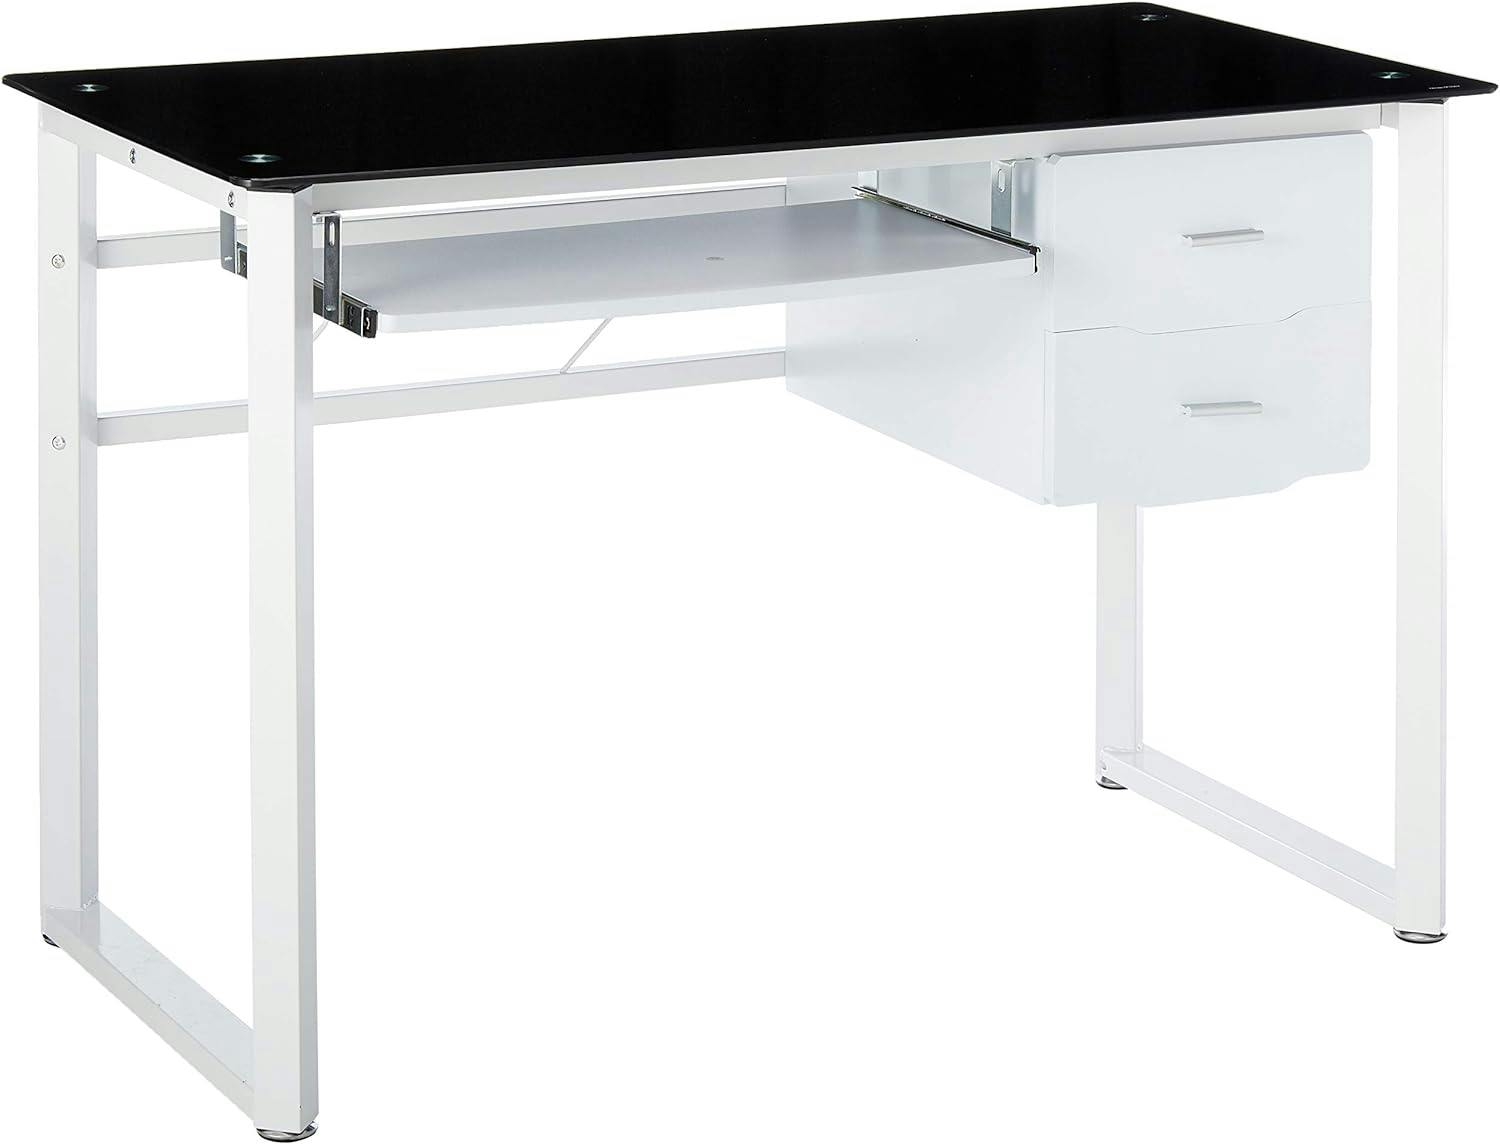 Sleek Black Tempered Glass Computer Desk with Keyboard Tray and Drawers